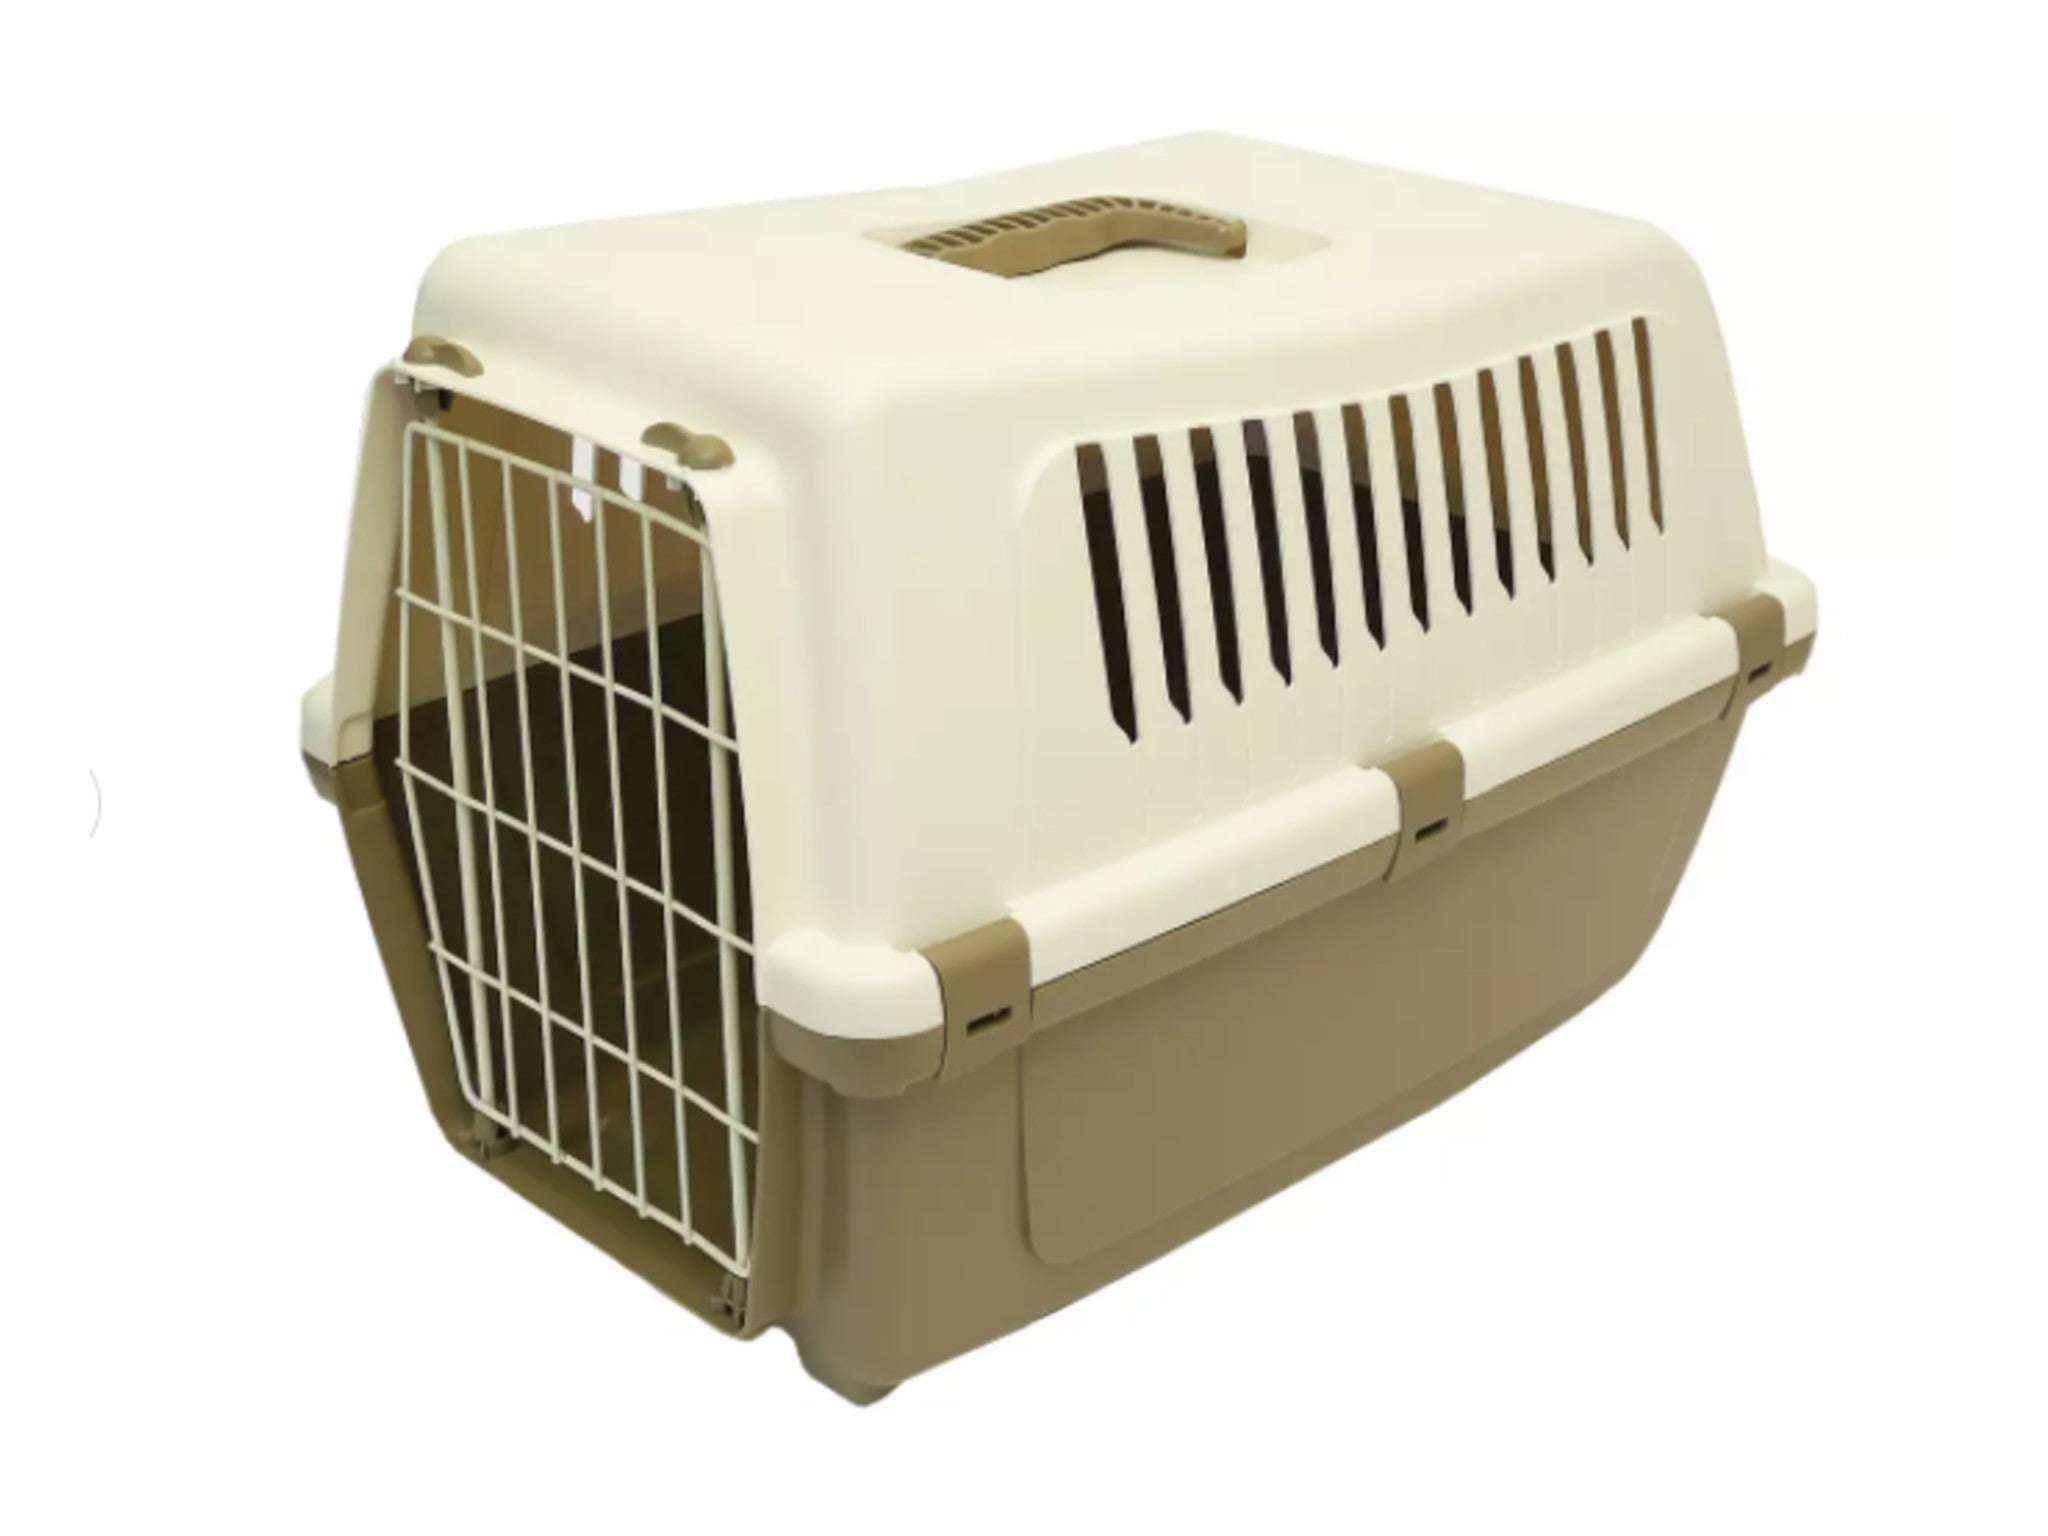 Rosewood plastic pet carrier with cushion – Medium indybest.jpg